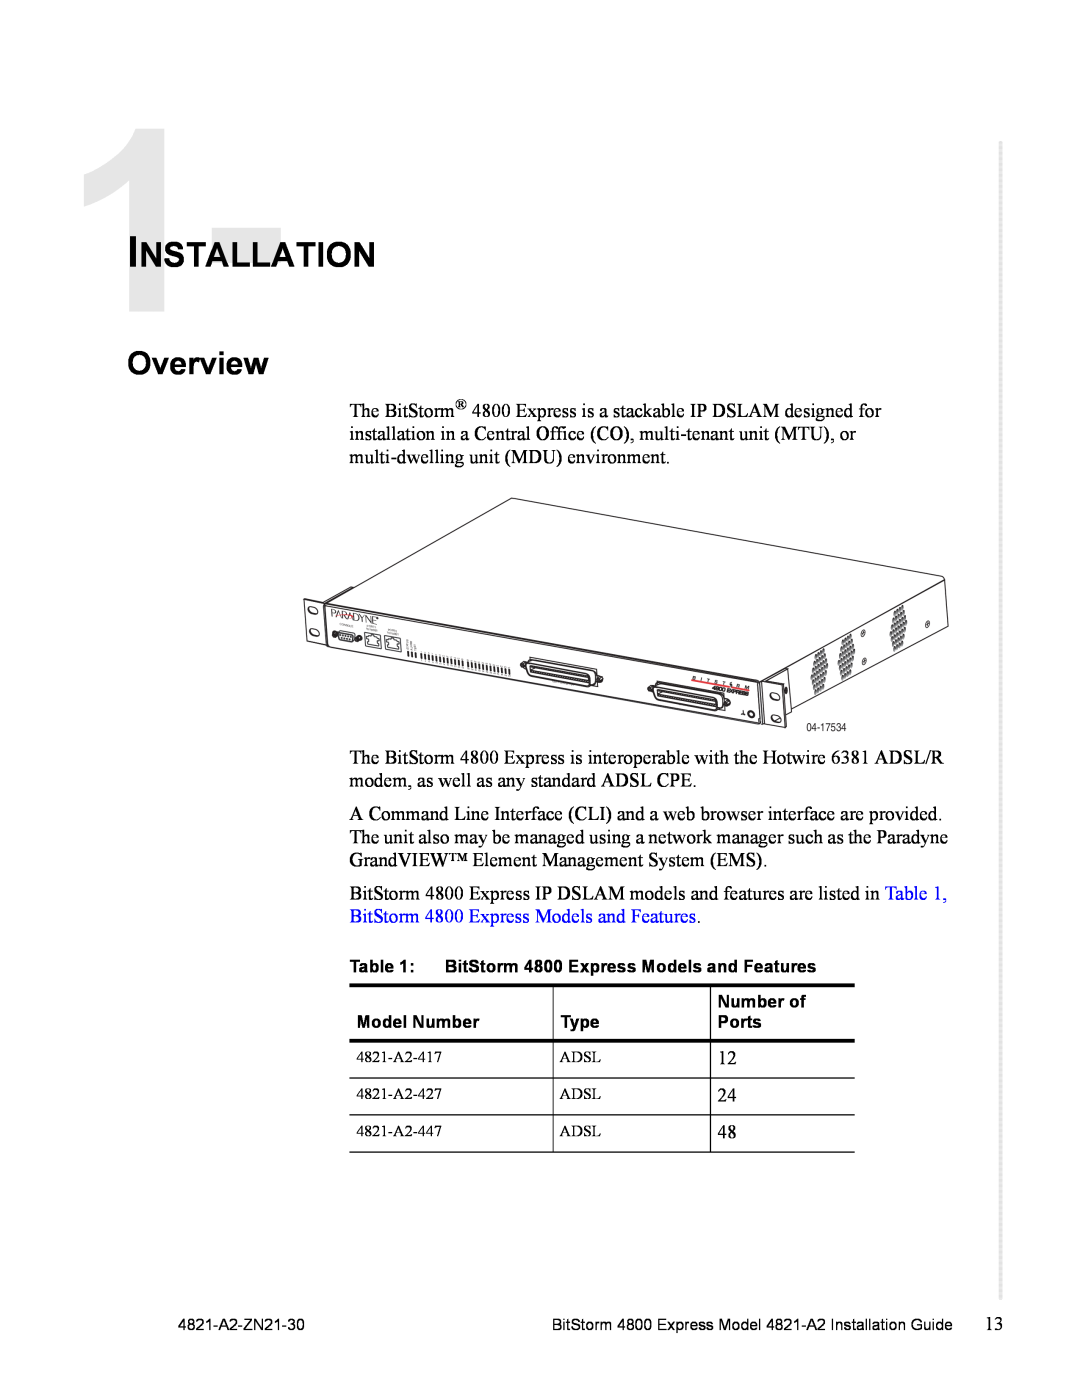 Zhone Technologies 4821-A2 manual Installation, Overview 